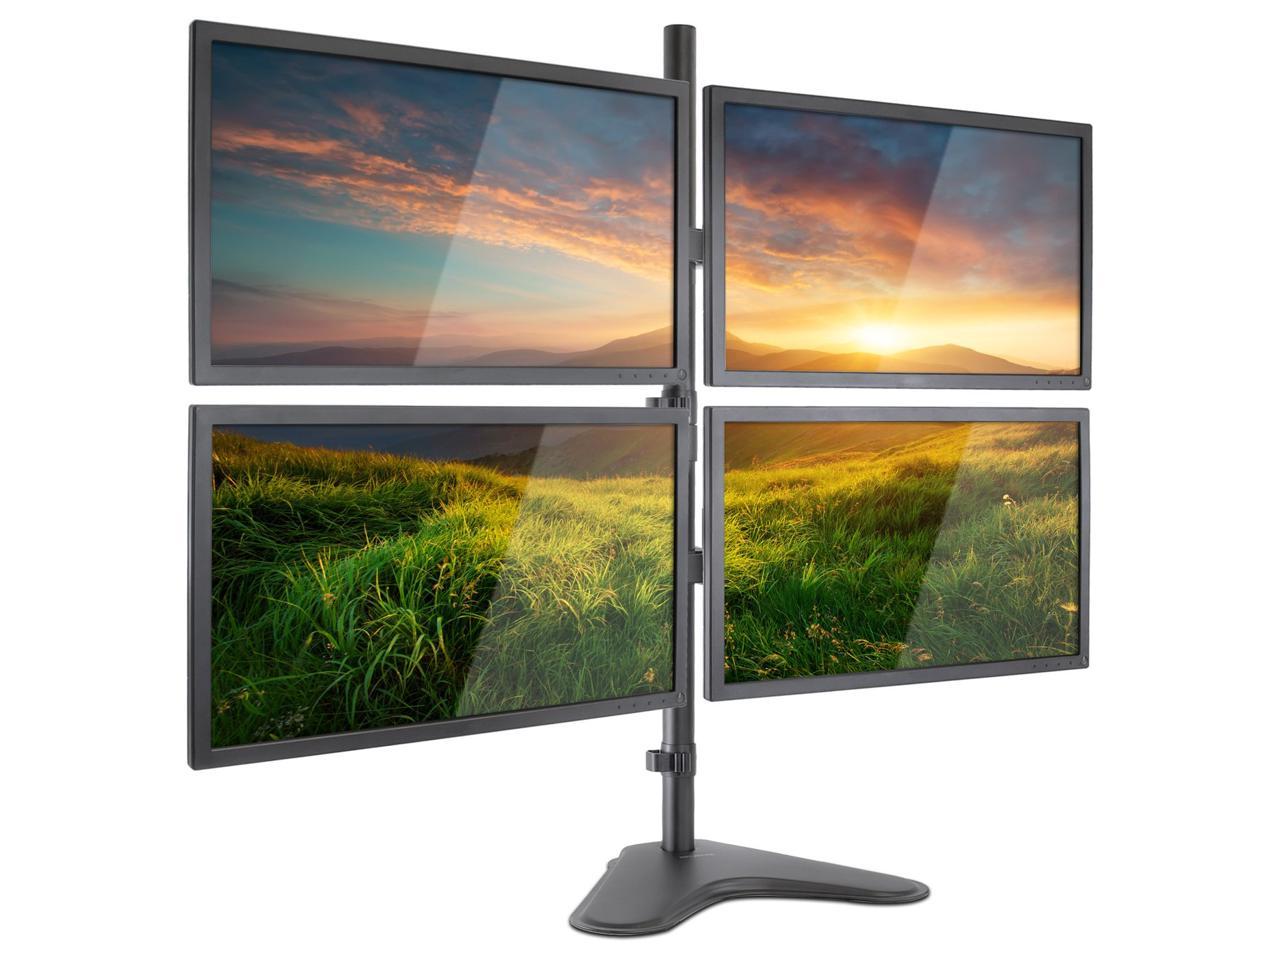 Height Adjustable Free Standing 4 Screen Mount Black Fits Monitors up to 32 Inches Mount-It Steel MI-2784 Quad Monitor Stand 